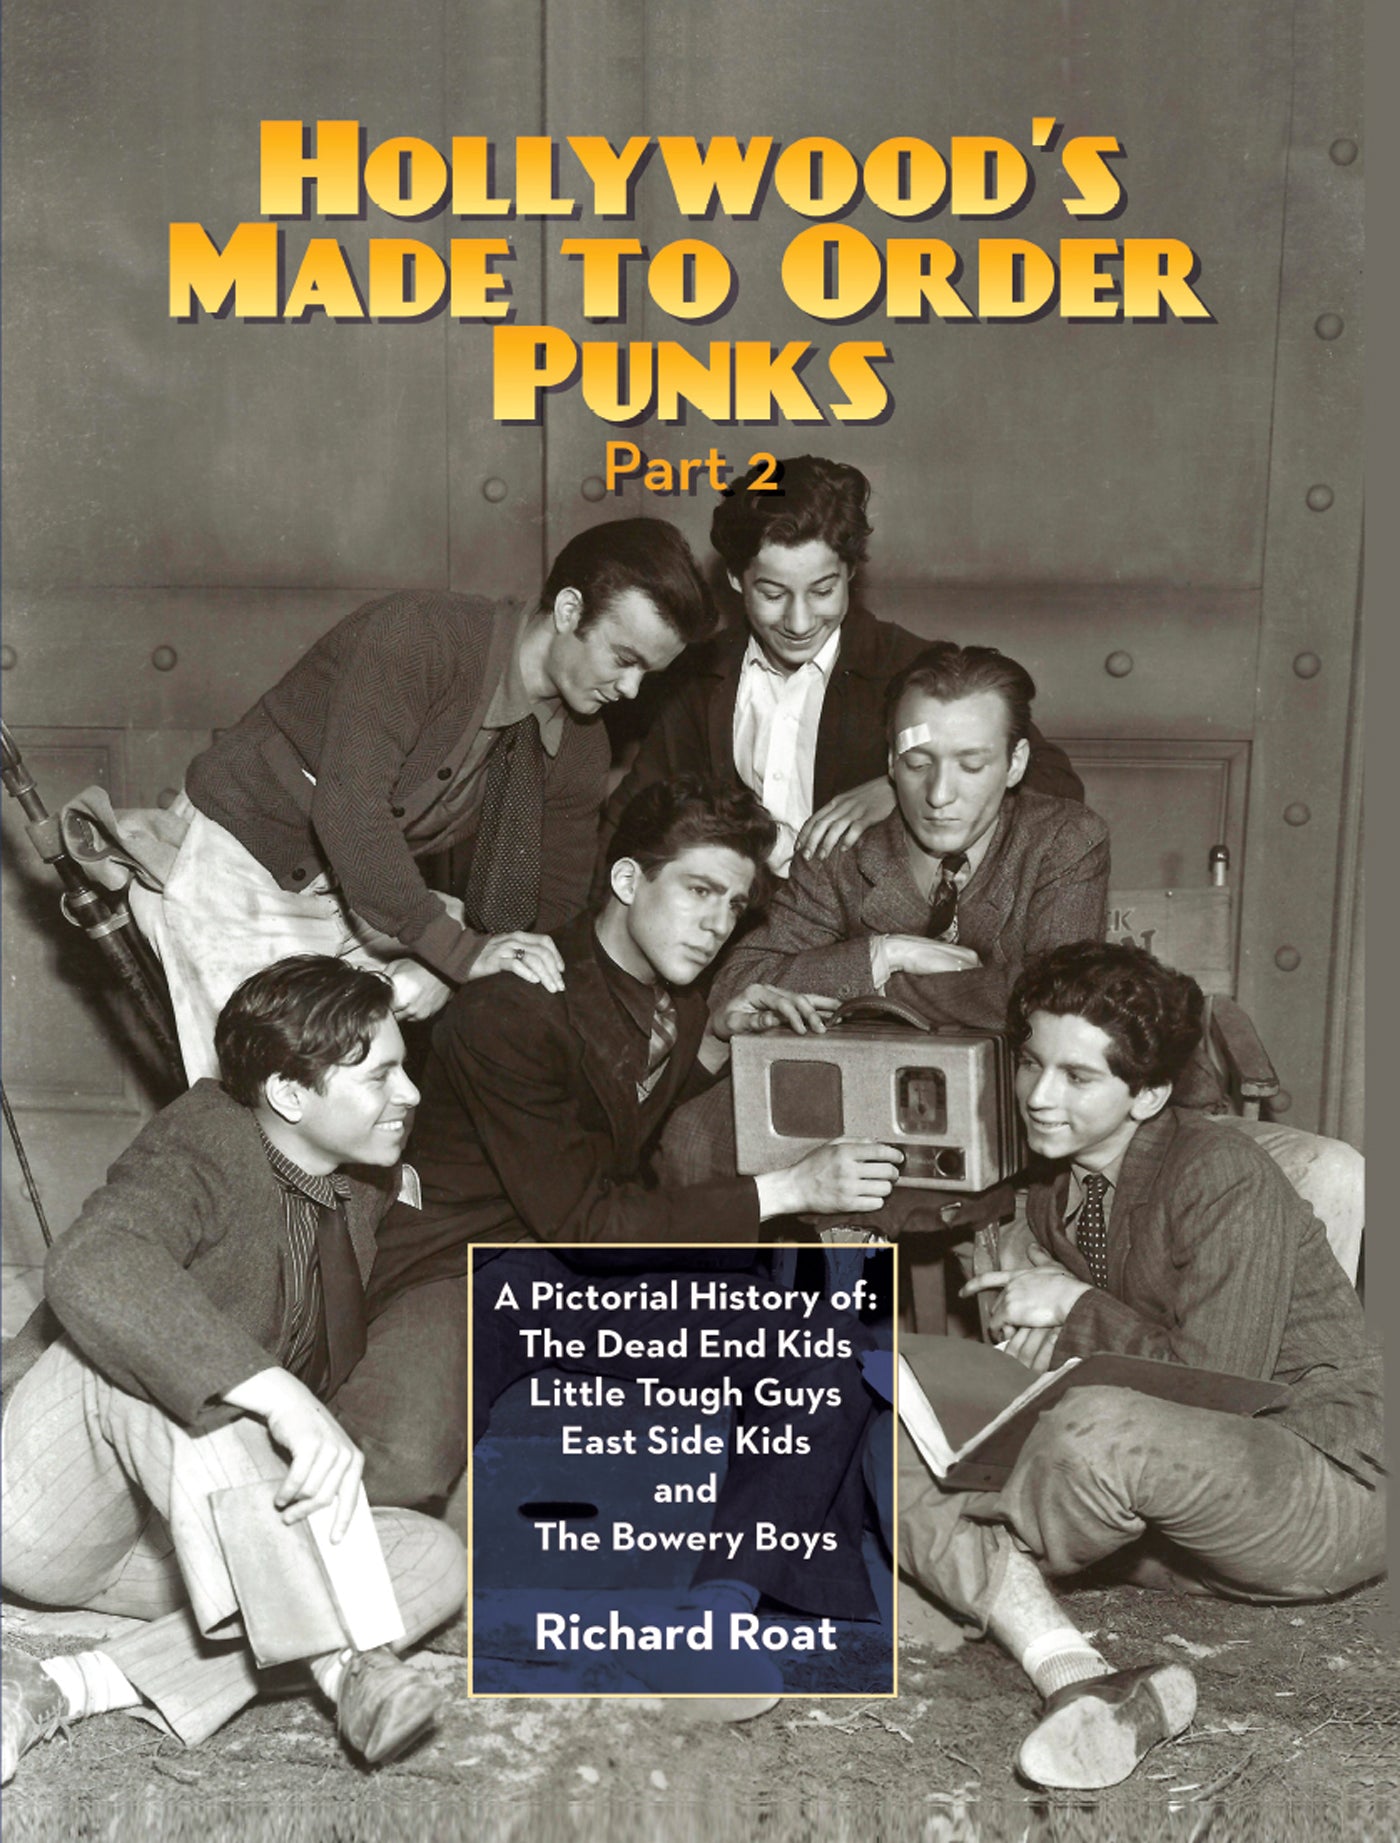 Hollywood's Made-to-Order Punks Part 2: A Pictorial History of the Dead End Kids, Little Tough Guys, East Side Kids and the Bowery Boys (ebook) - BearManor Manor